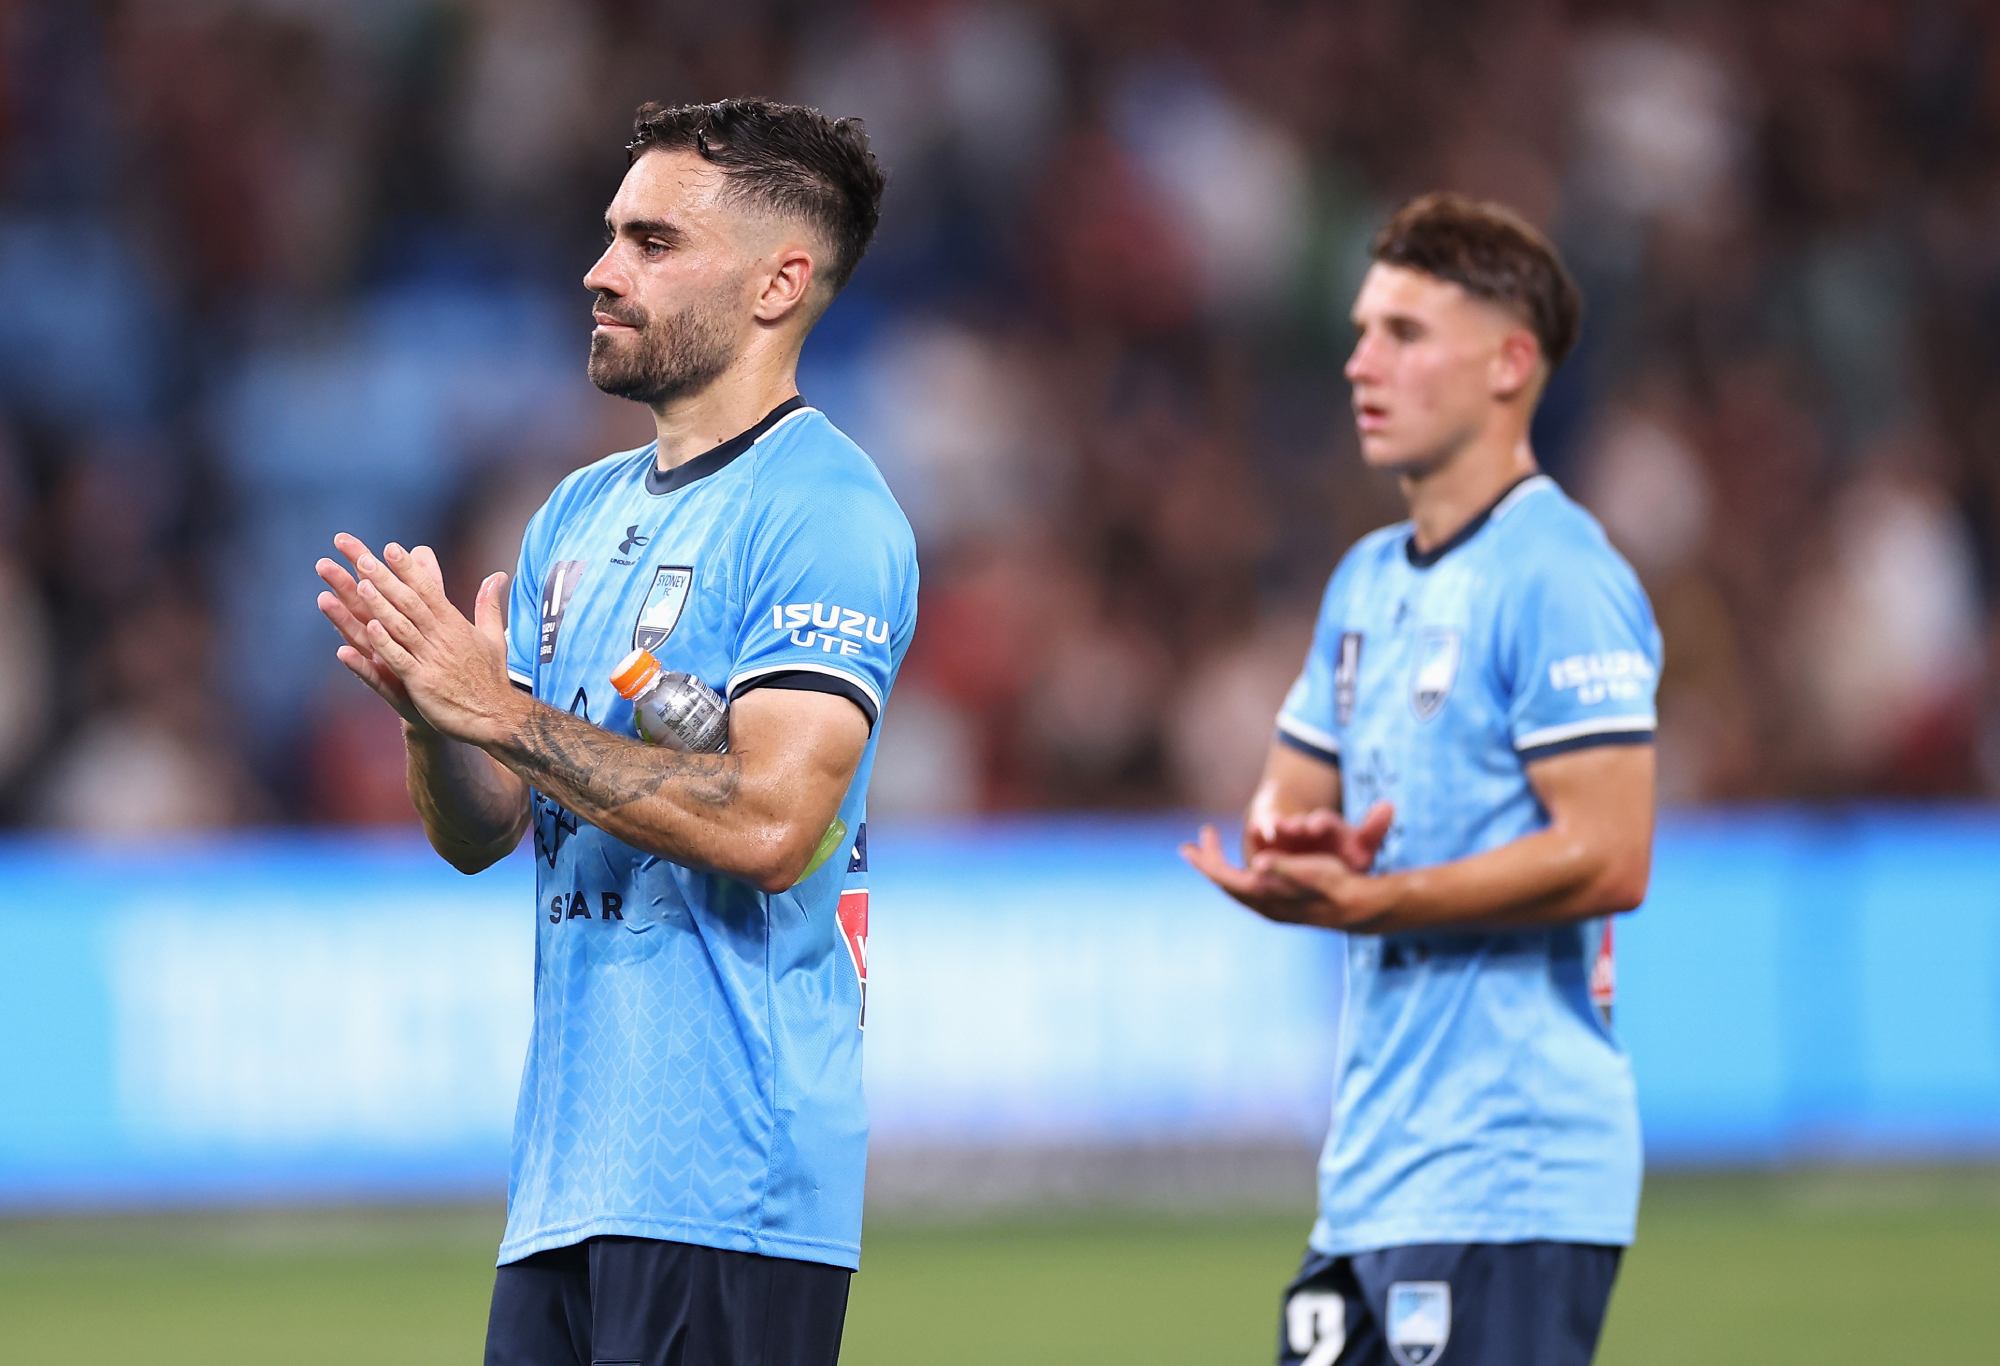 SYDNEY, AUSTRALIA - MARCH 18: Anthony Caceres of Sydney FC and Adrian Segecic of Sydney FC thank fans after losing the round 21 A-League Men's match between Sydney FC and Western Sydney Wanderers at Allianz Stadium, on March 18, 2023, in Sydney, Australia. (Photo by Cameron Spencer/Getty Images)